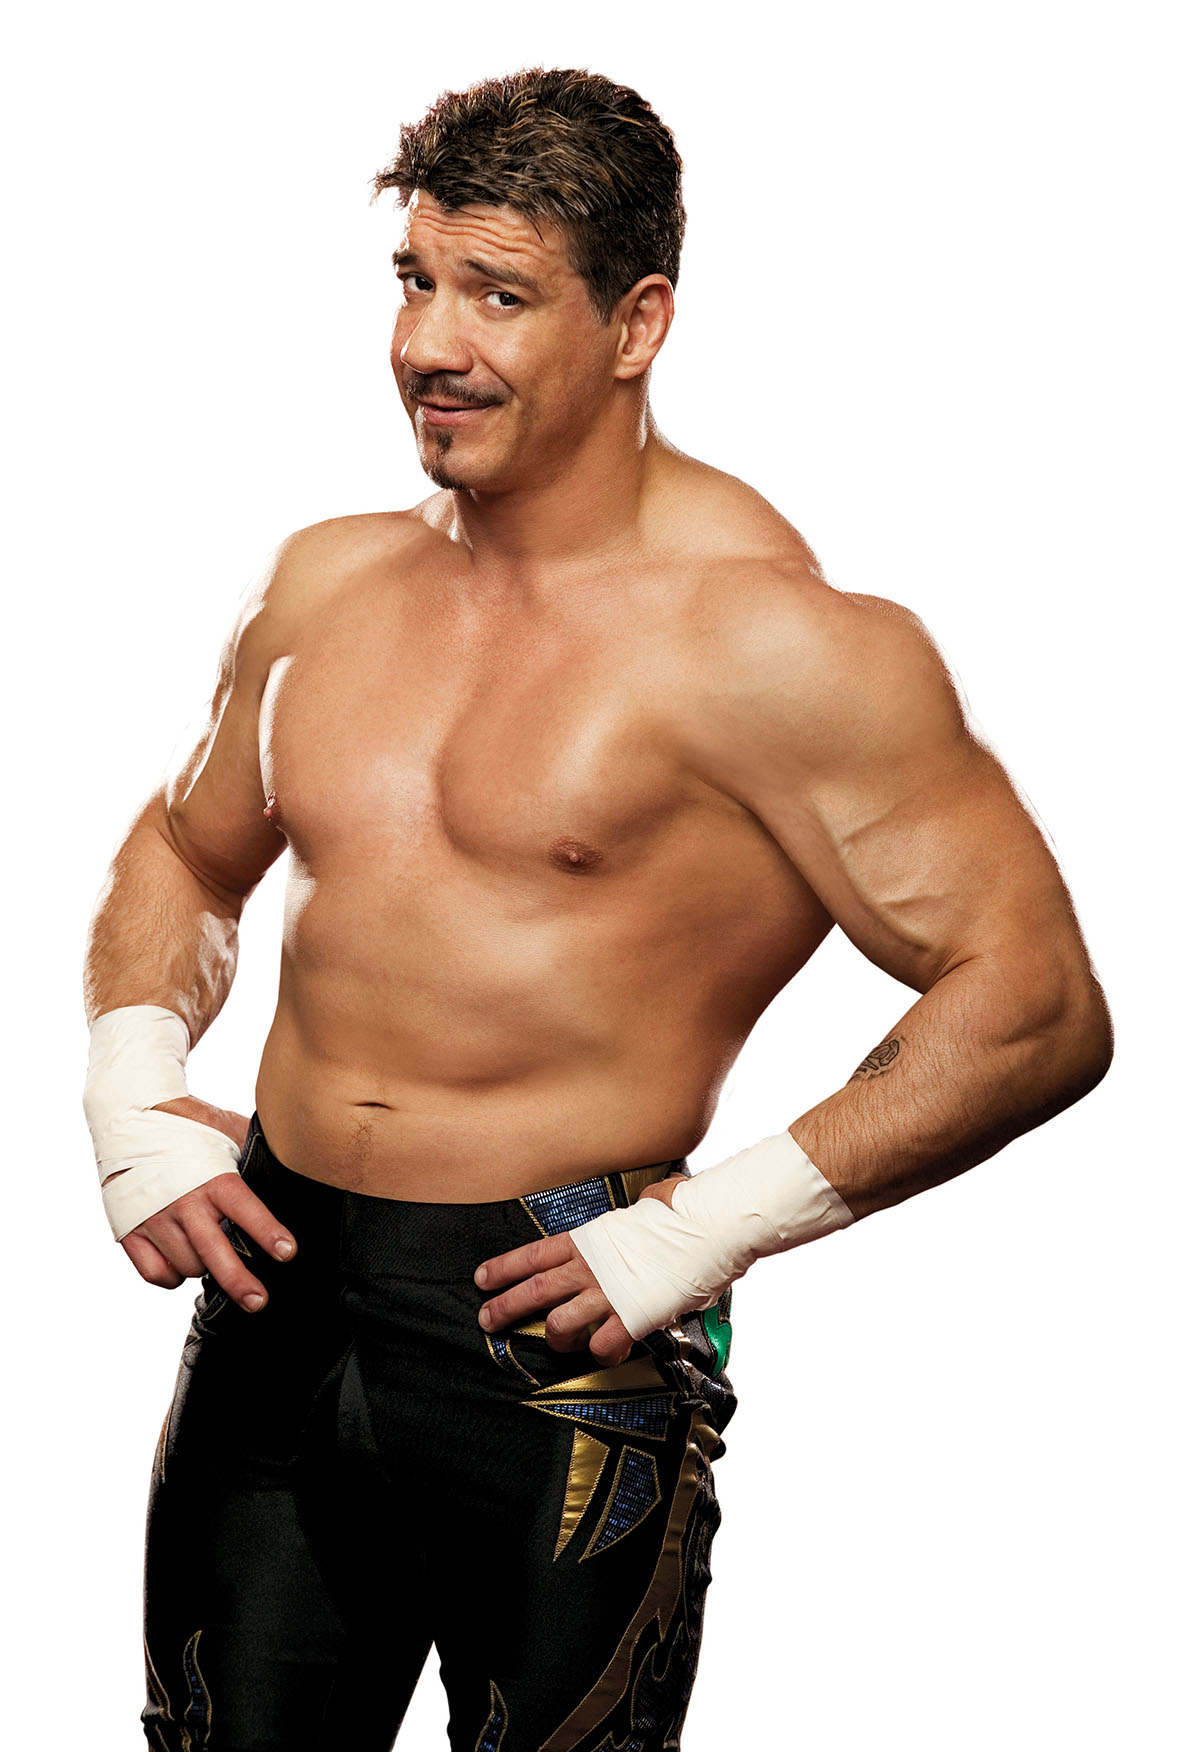 A shirtless man with white wraps on his wrist and black pants poses for the camera on a white background